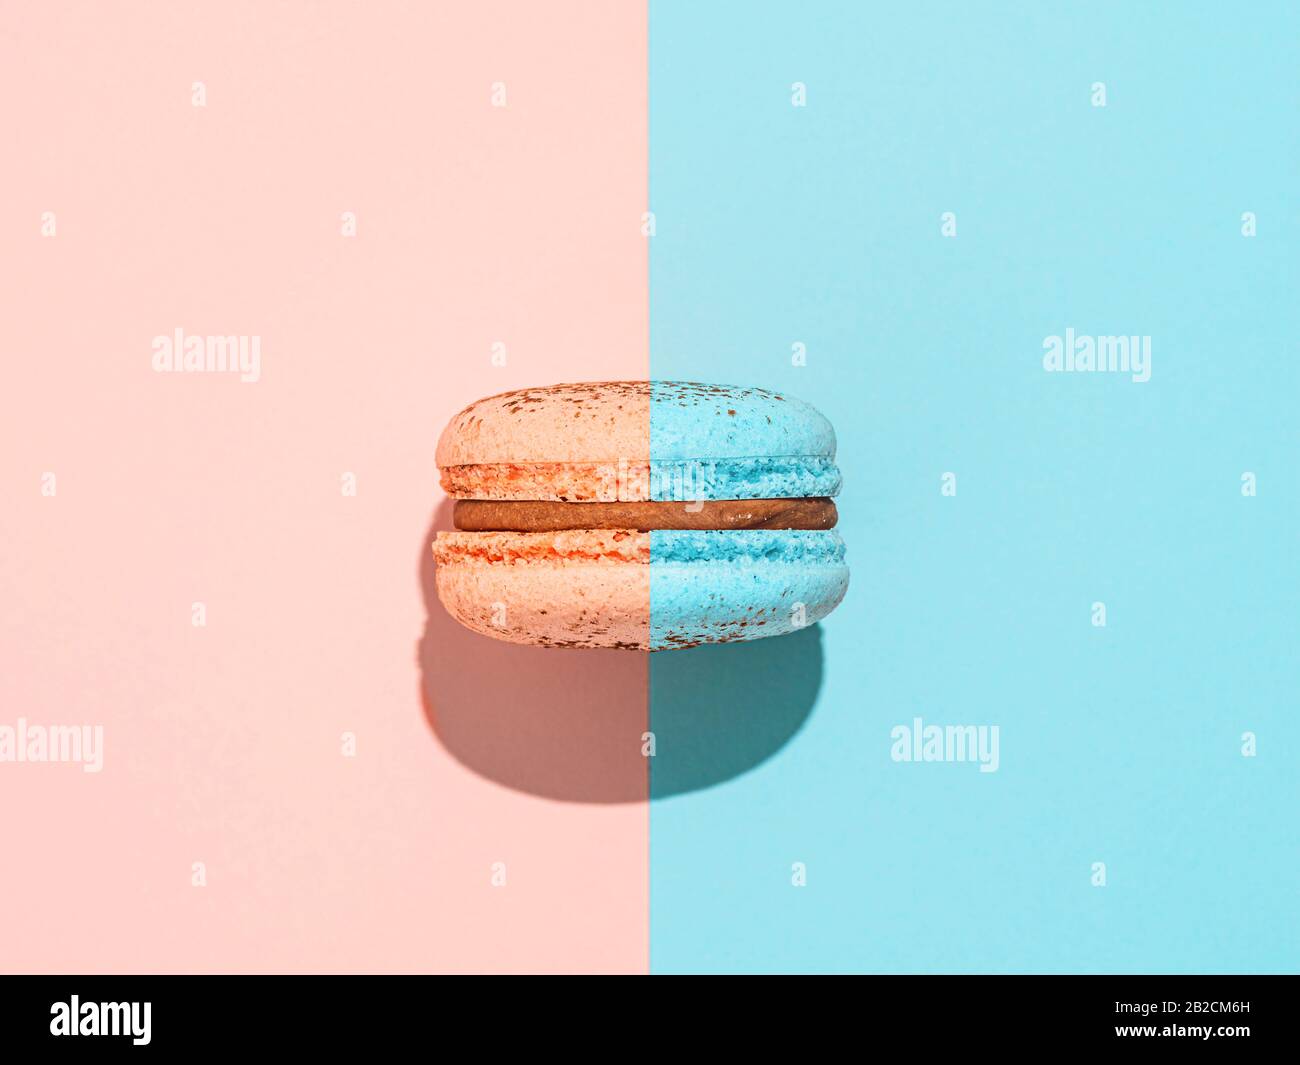 Creative layout with macaron. Trendy light. Two colors macaron or macaroon on duotone coral pink and blue background. Top view or flat lay. Hard light Stock Photo